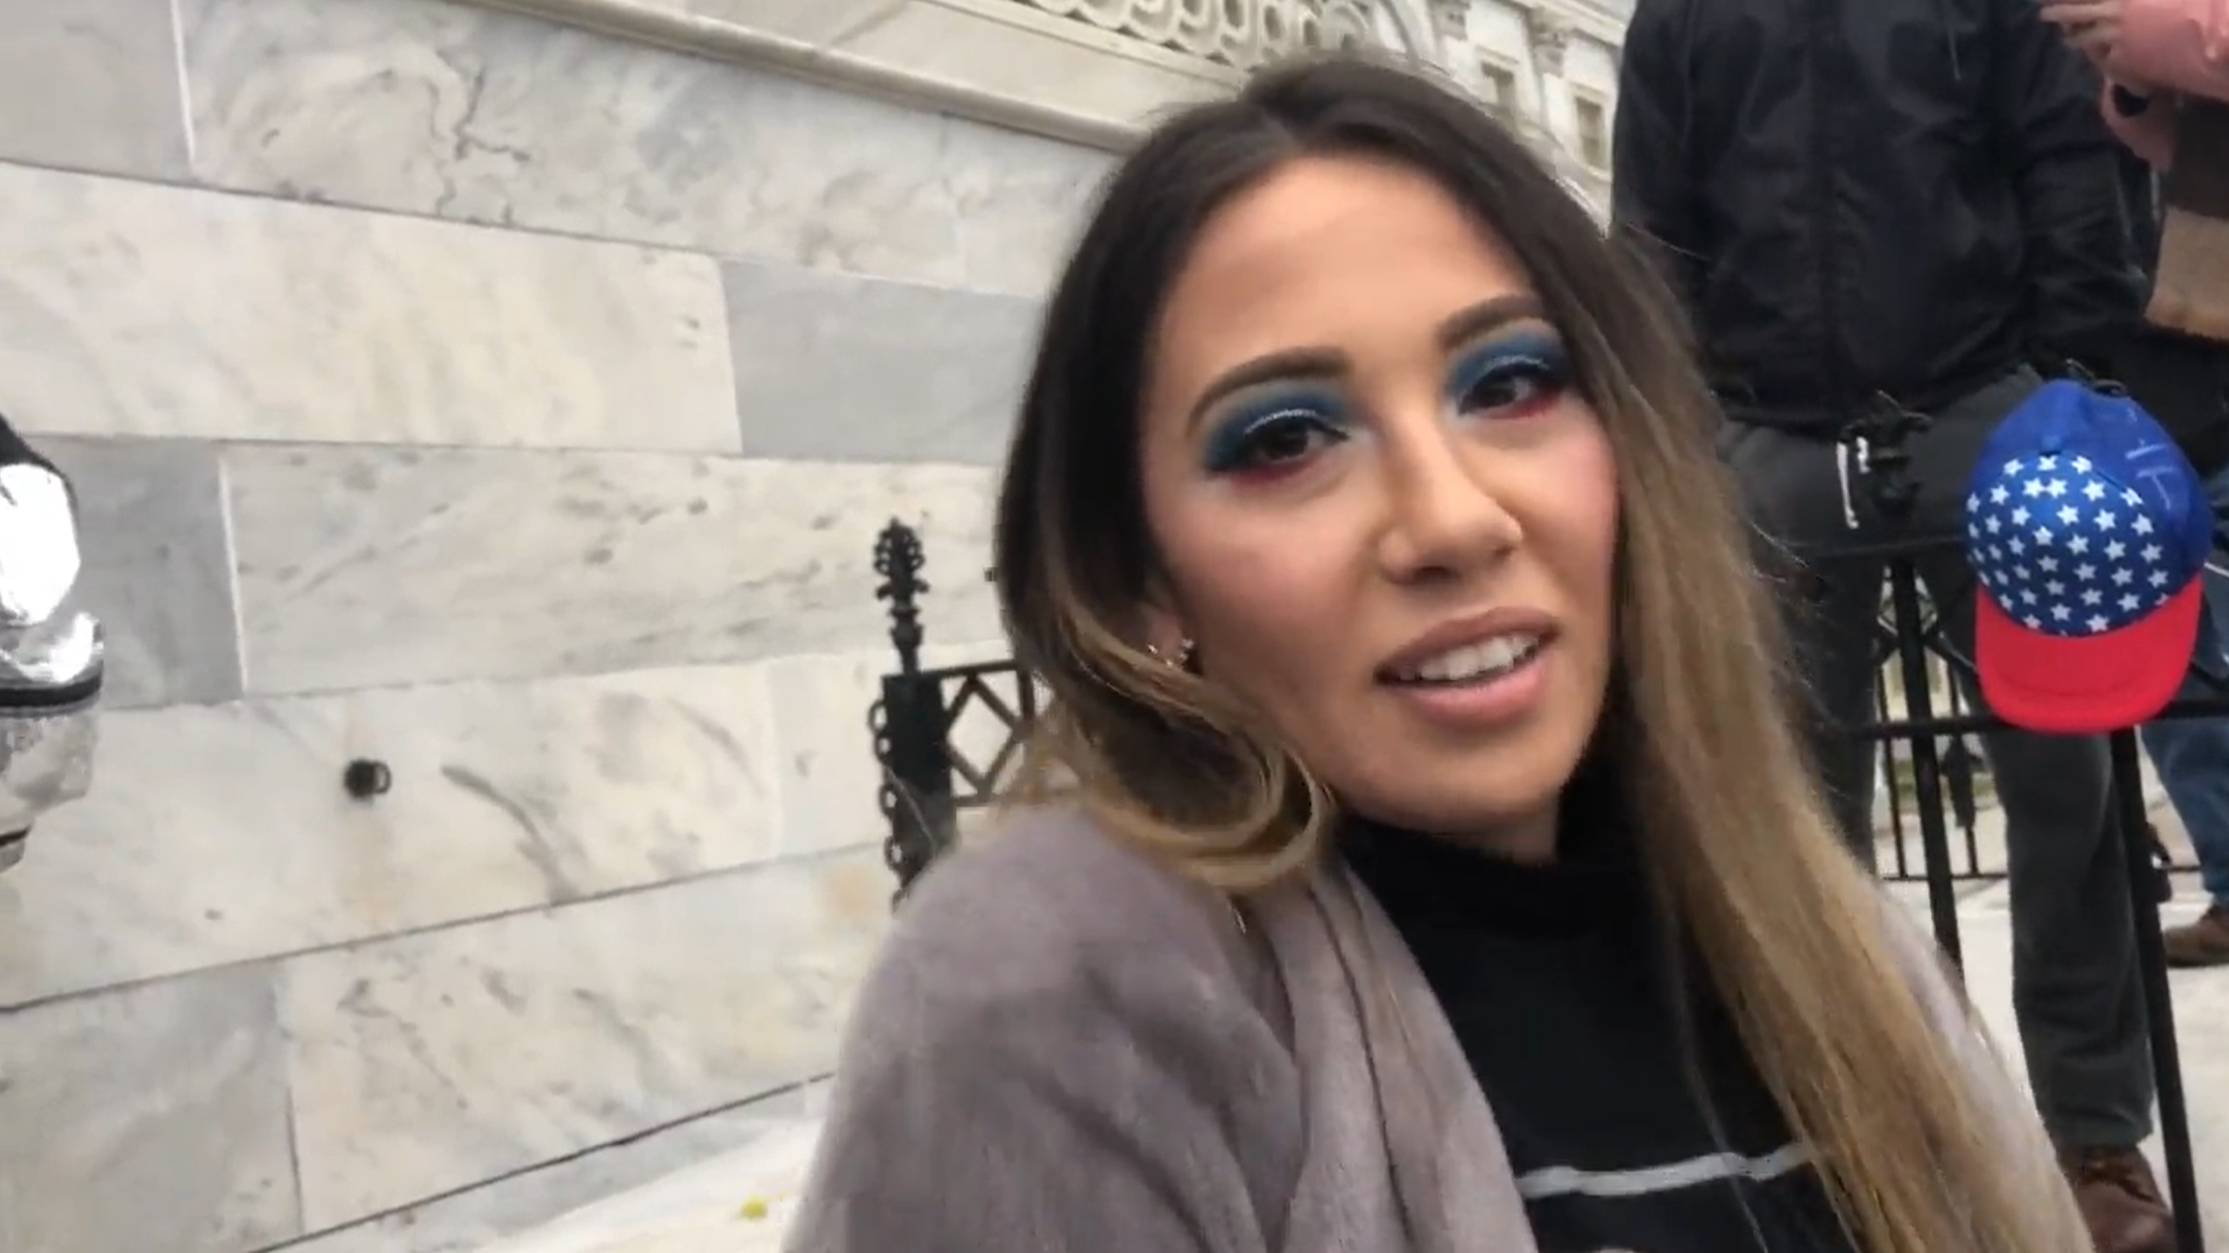 Stephanie Baez is facing federal charges in connection to the pro-Trump riot at the US Capitol.